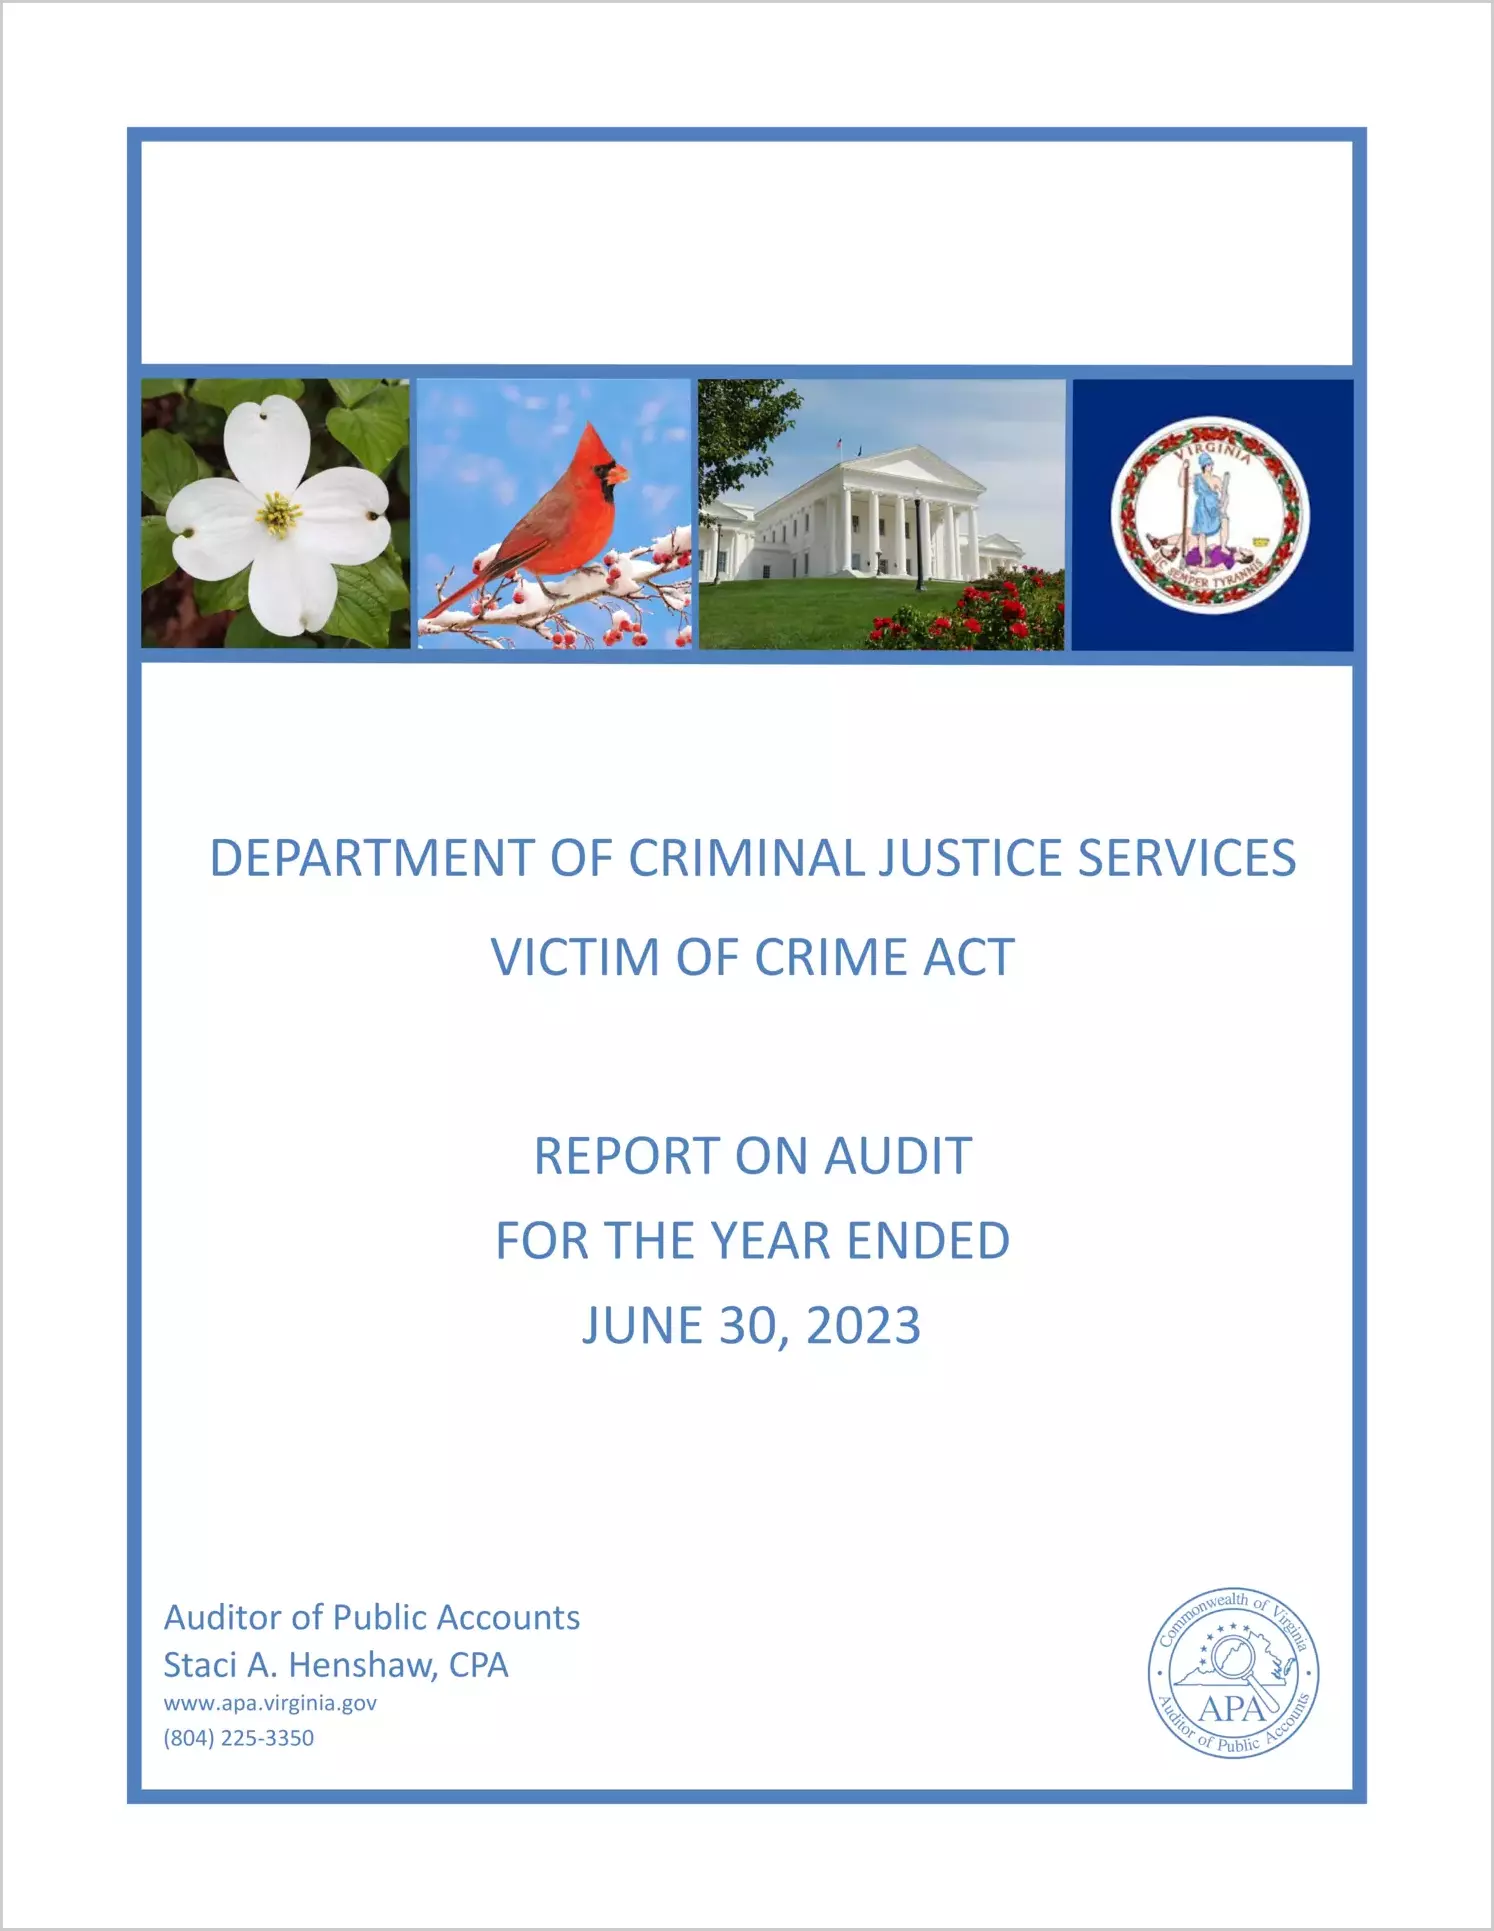 Department of Criminal Justice Services Victim of Crime Act for the year ended June 30, 2023